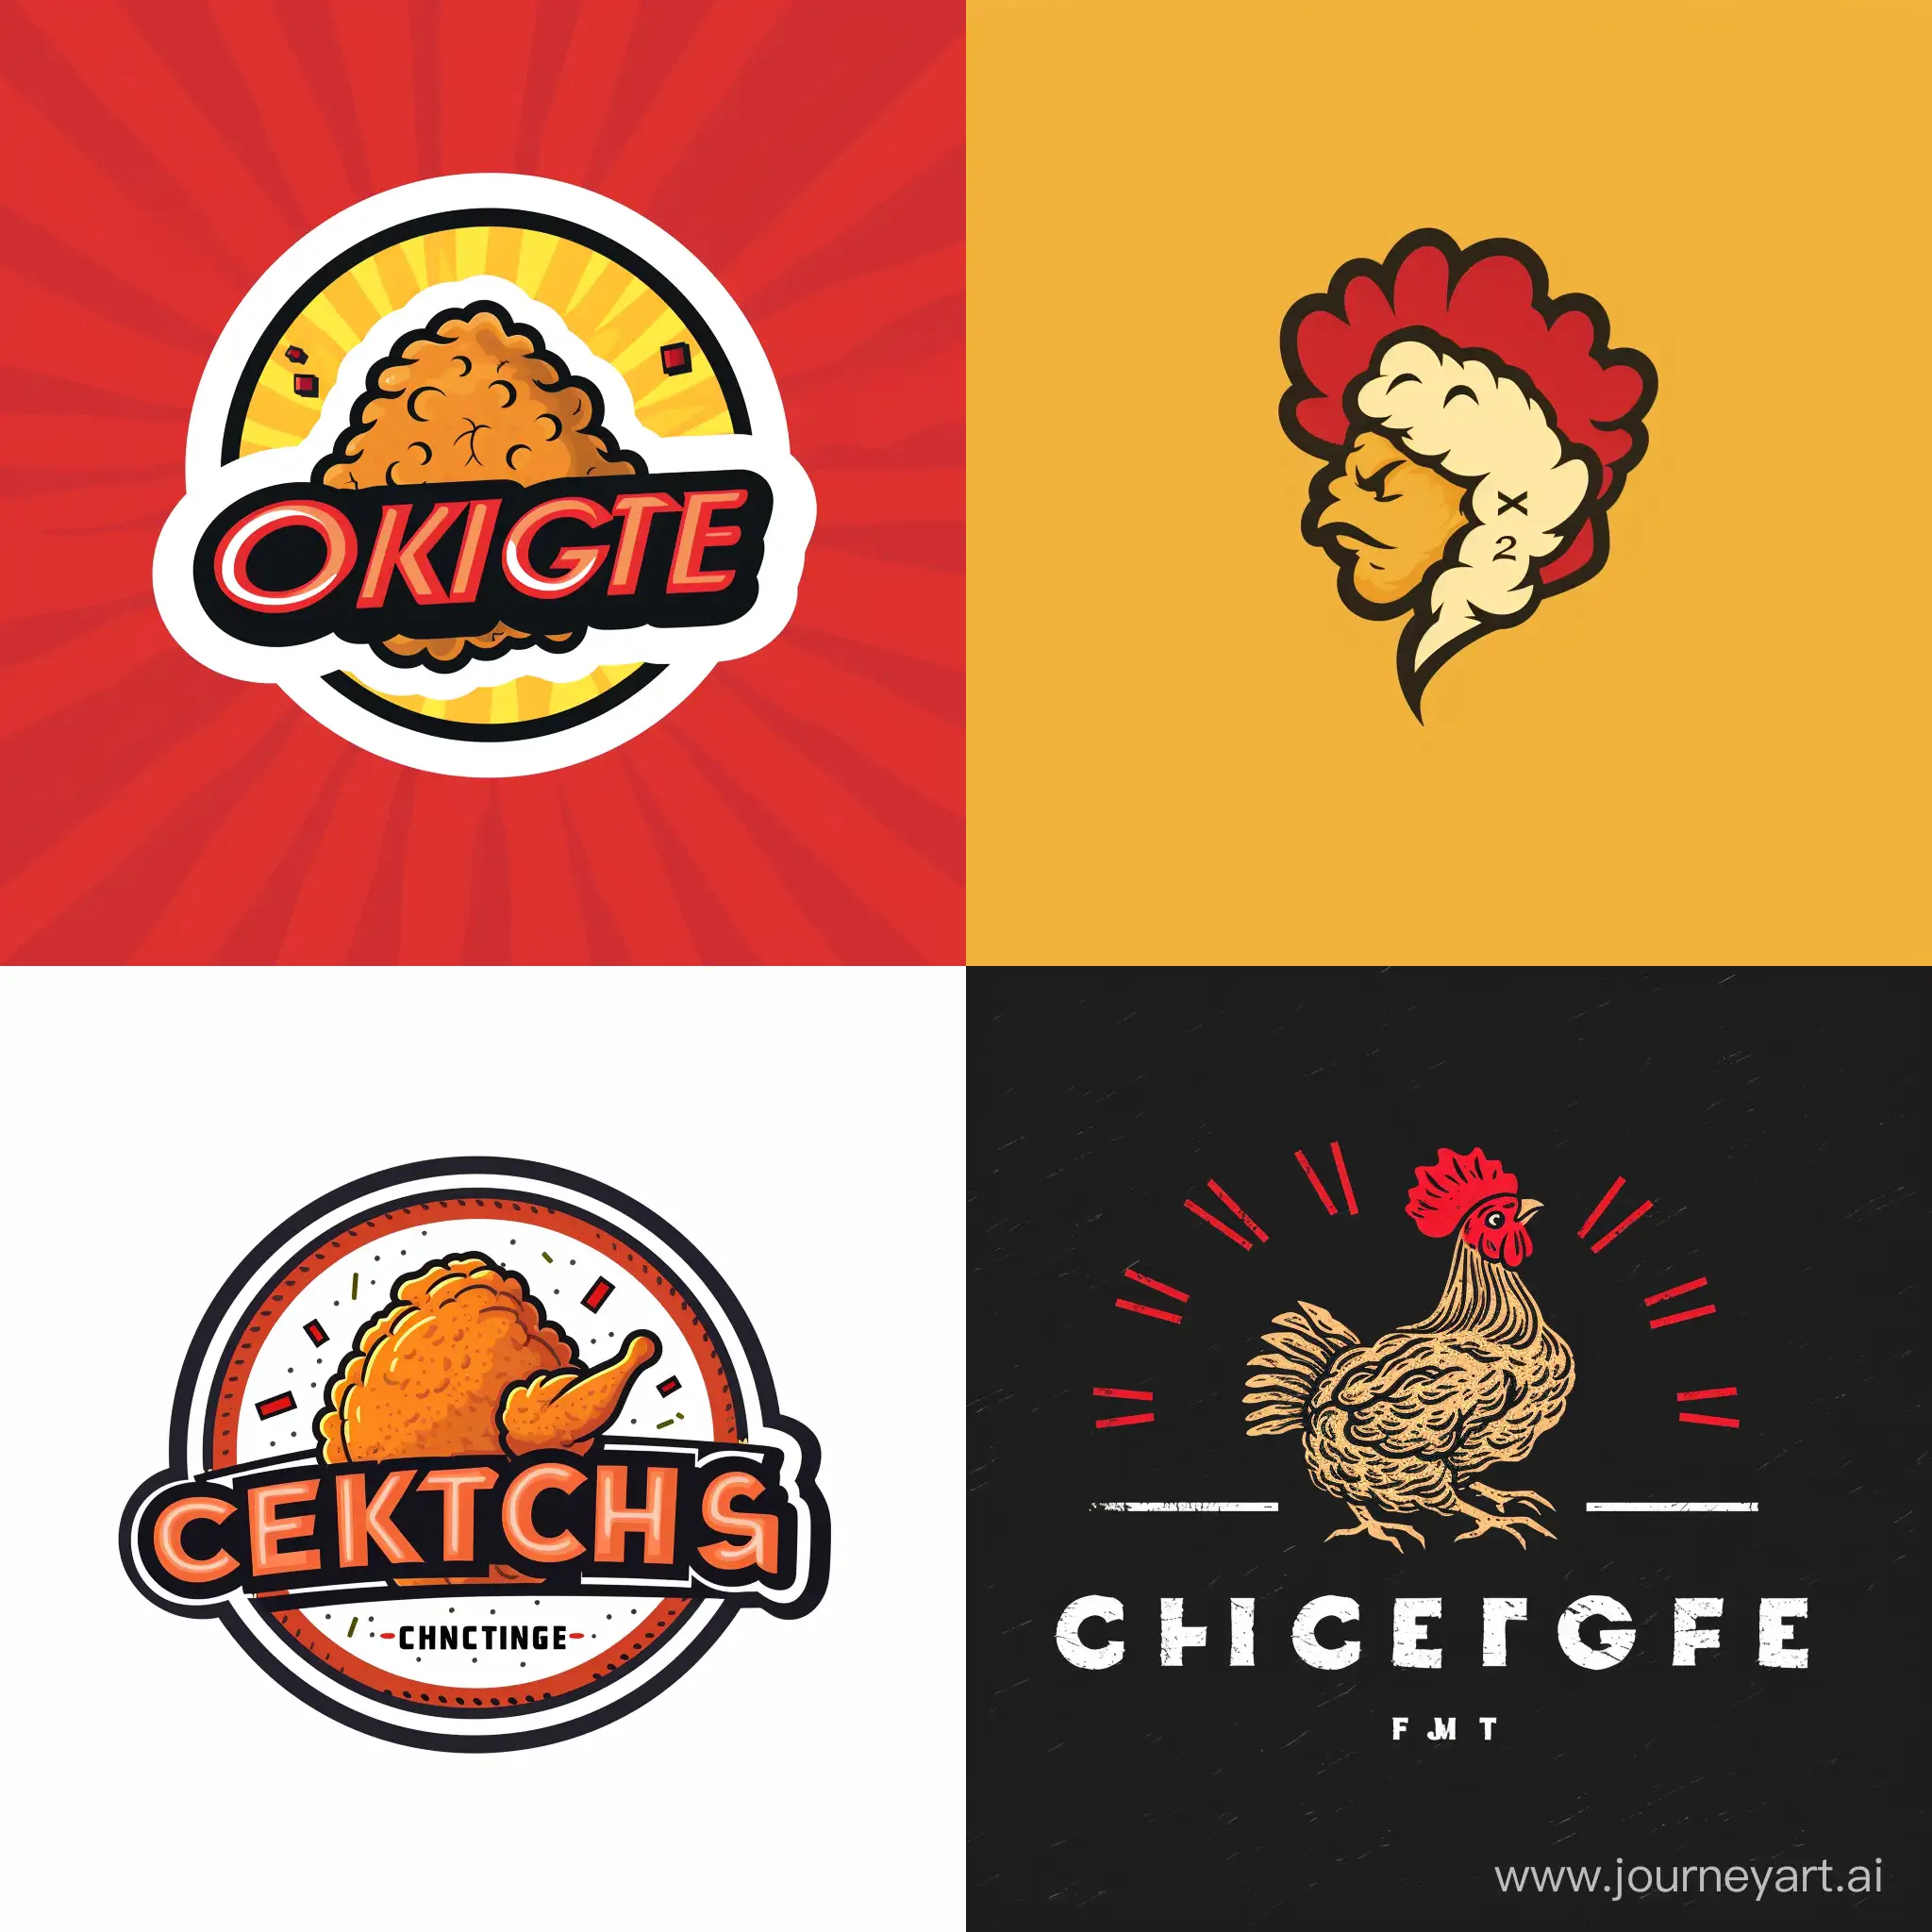 Delicious-Fried-Chicken-Logo-with-Vibrant-Visuals